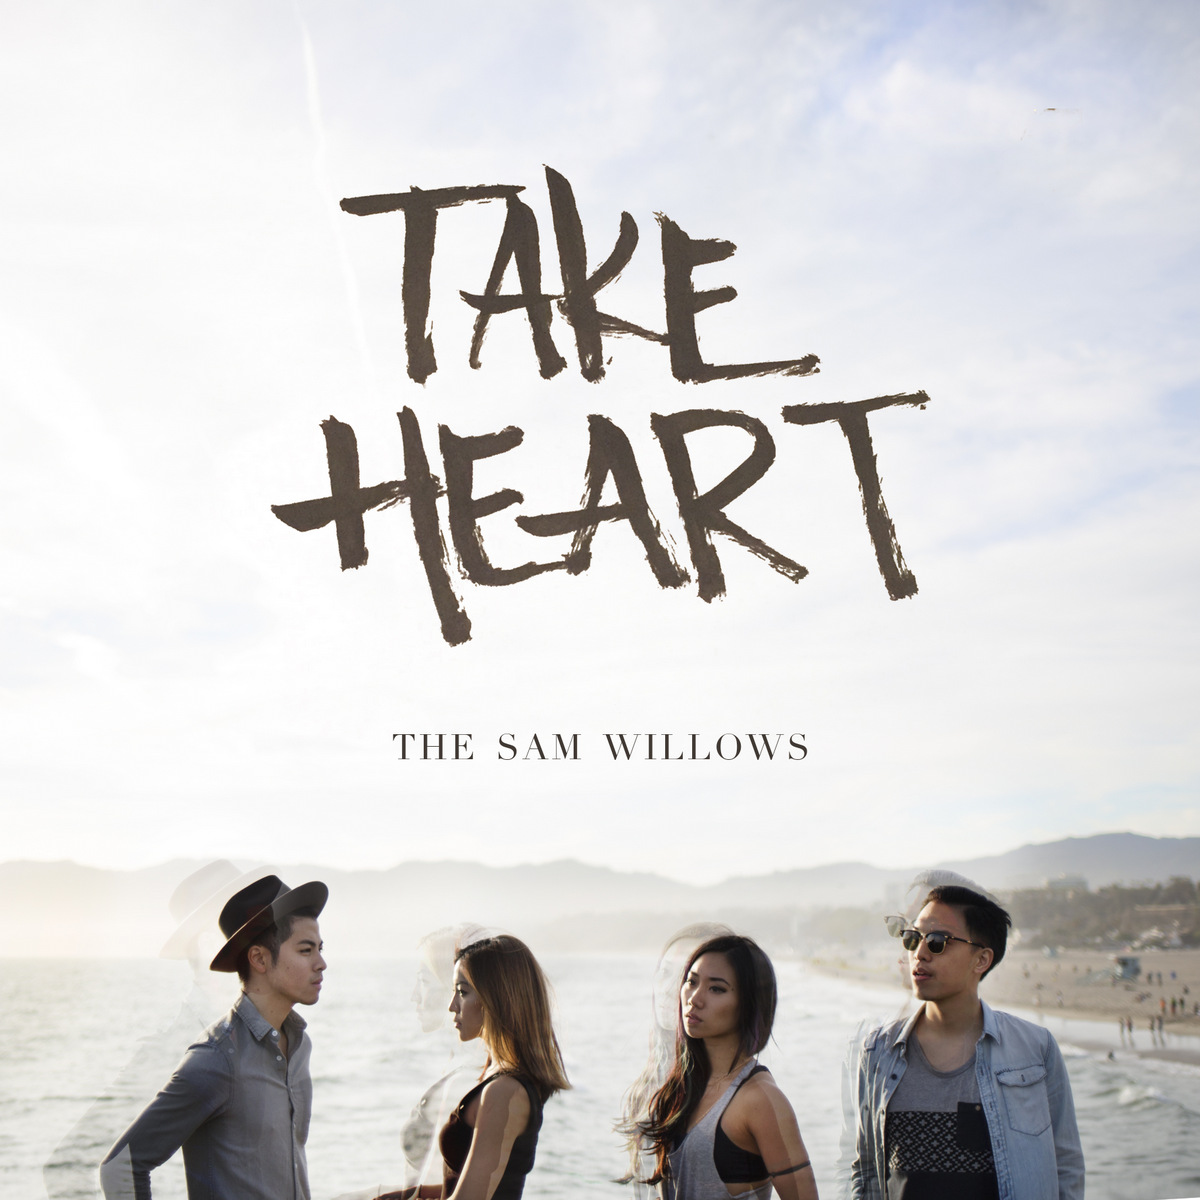 The Sam Willows Releases "Take Heart" single internationally on 20 May 2015.